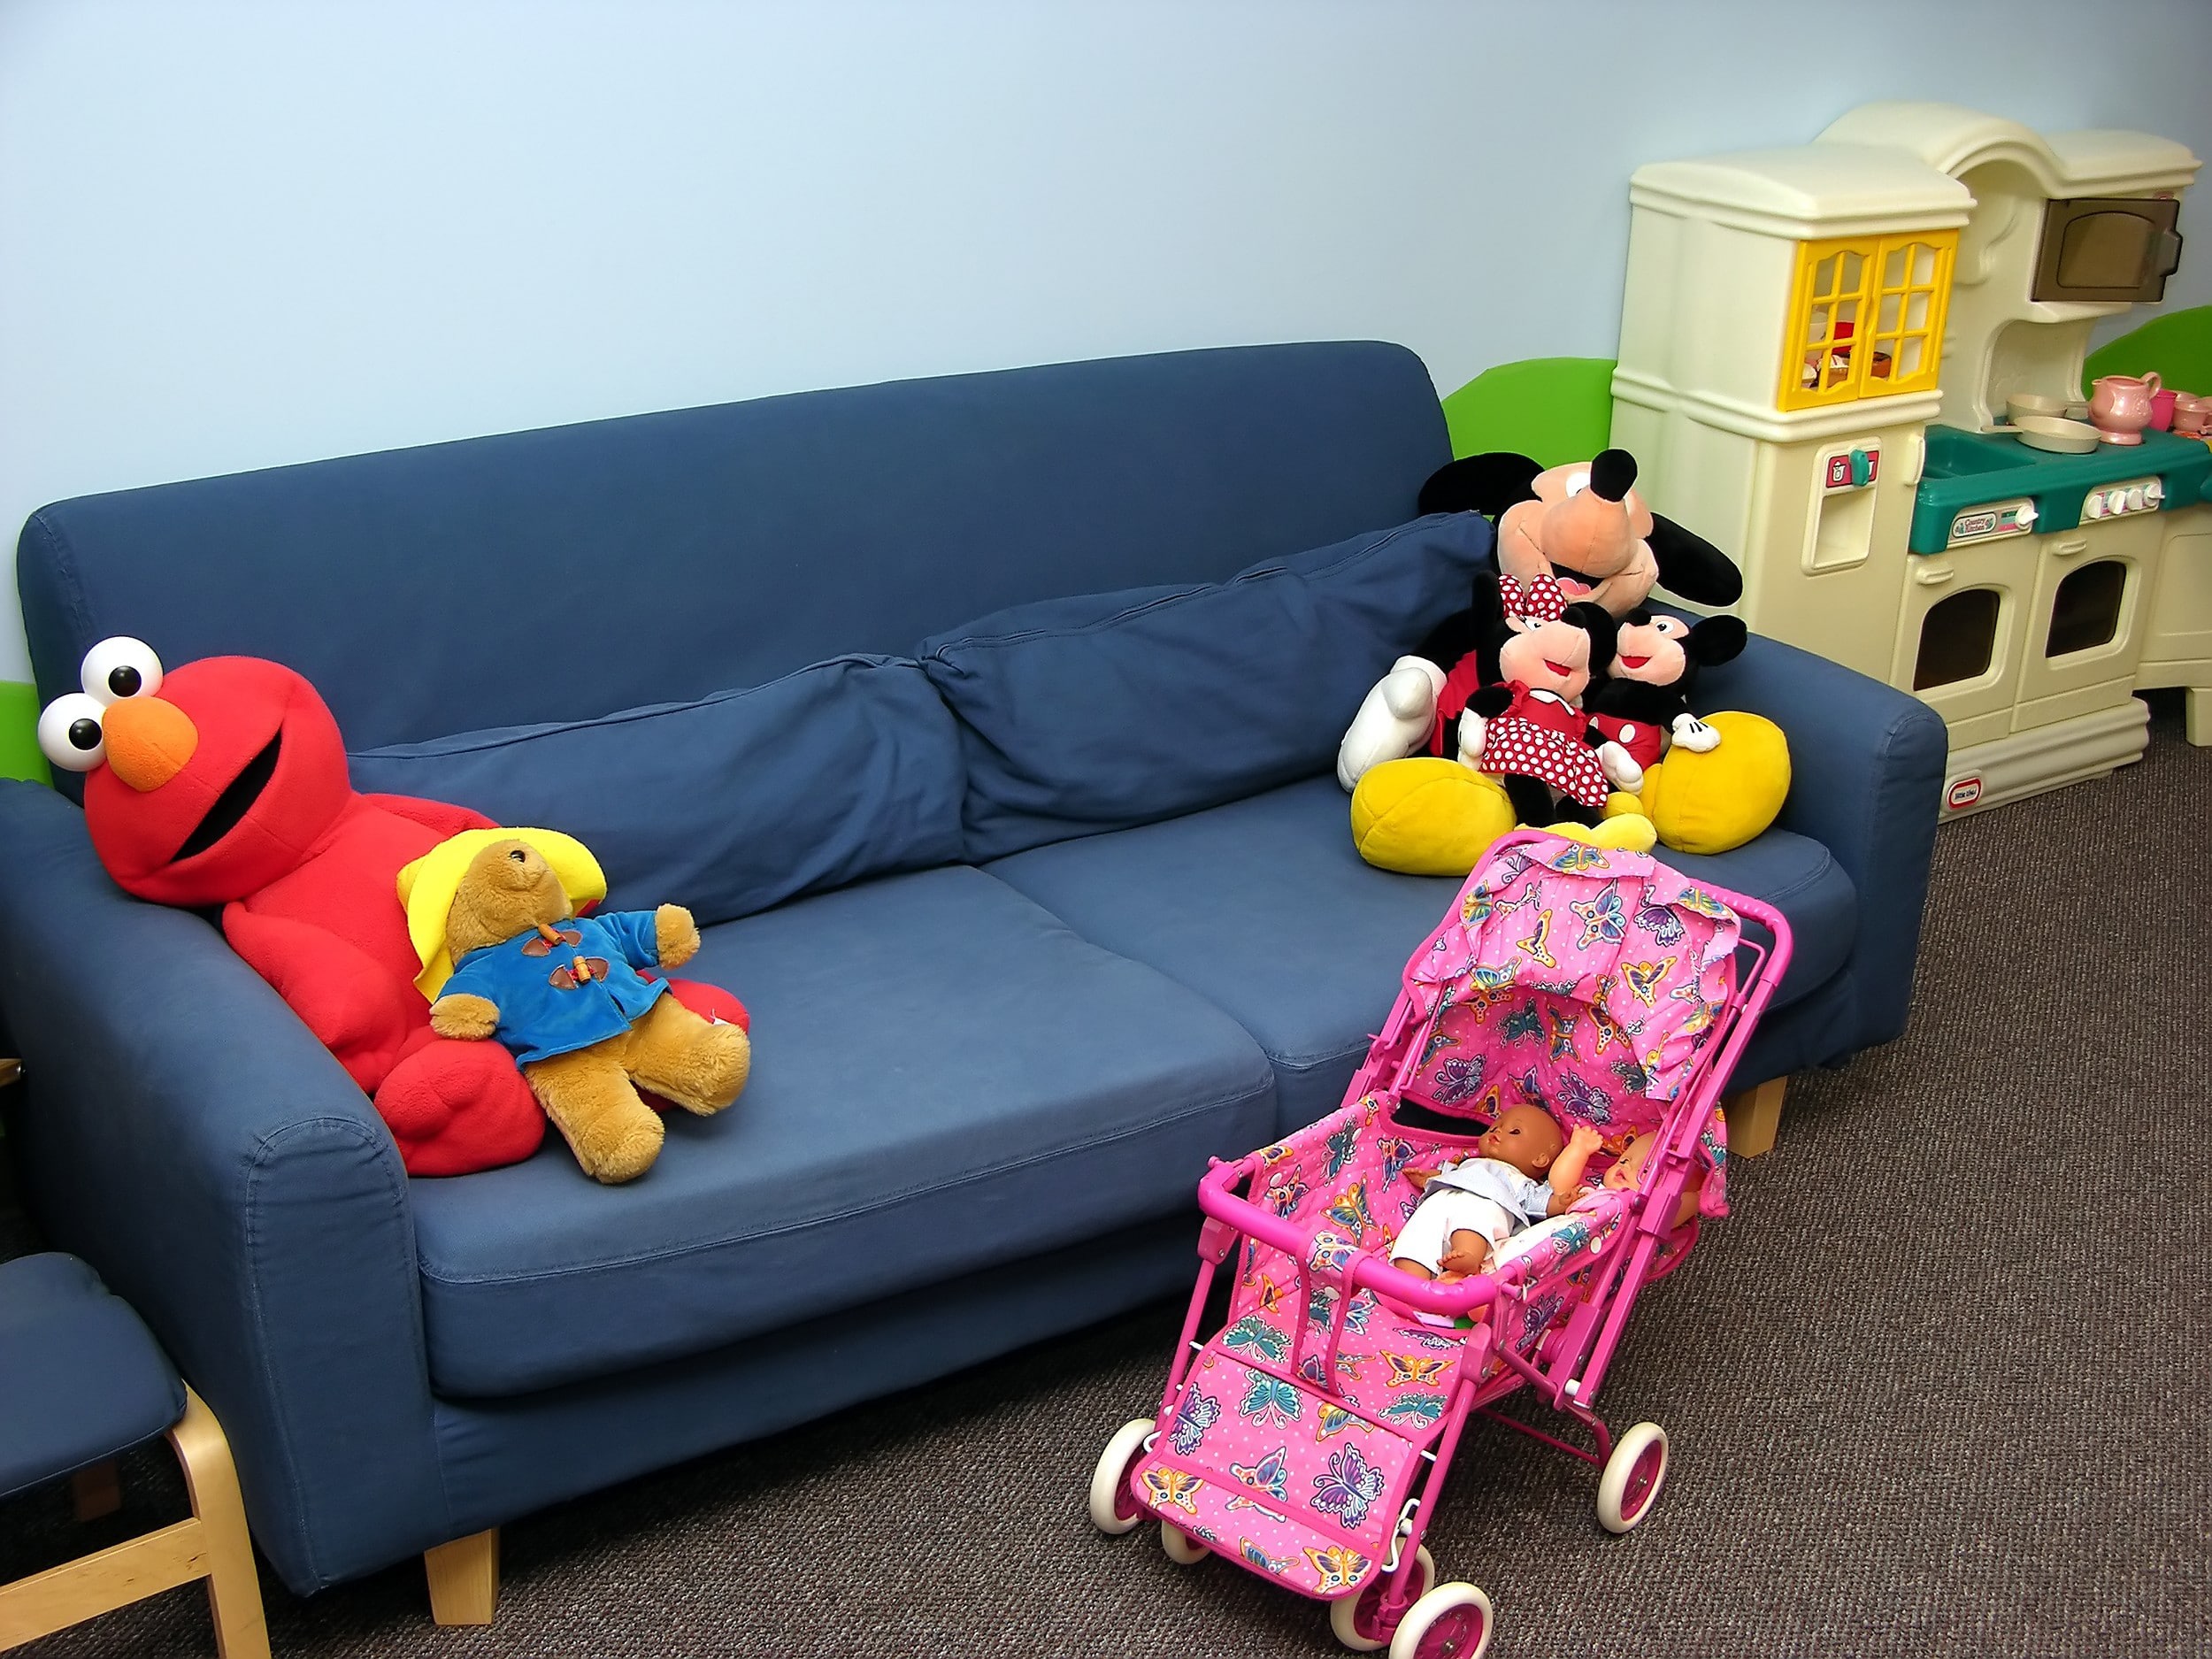 3 Tricks for Keeping a Child’s Playroom Mess